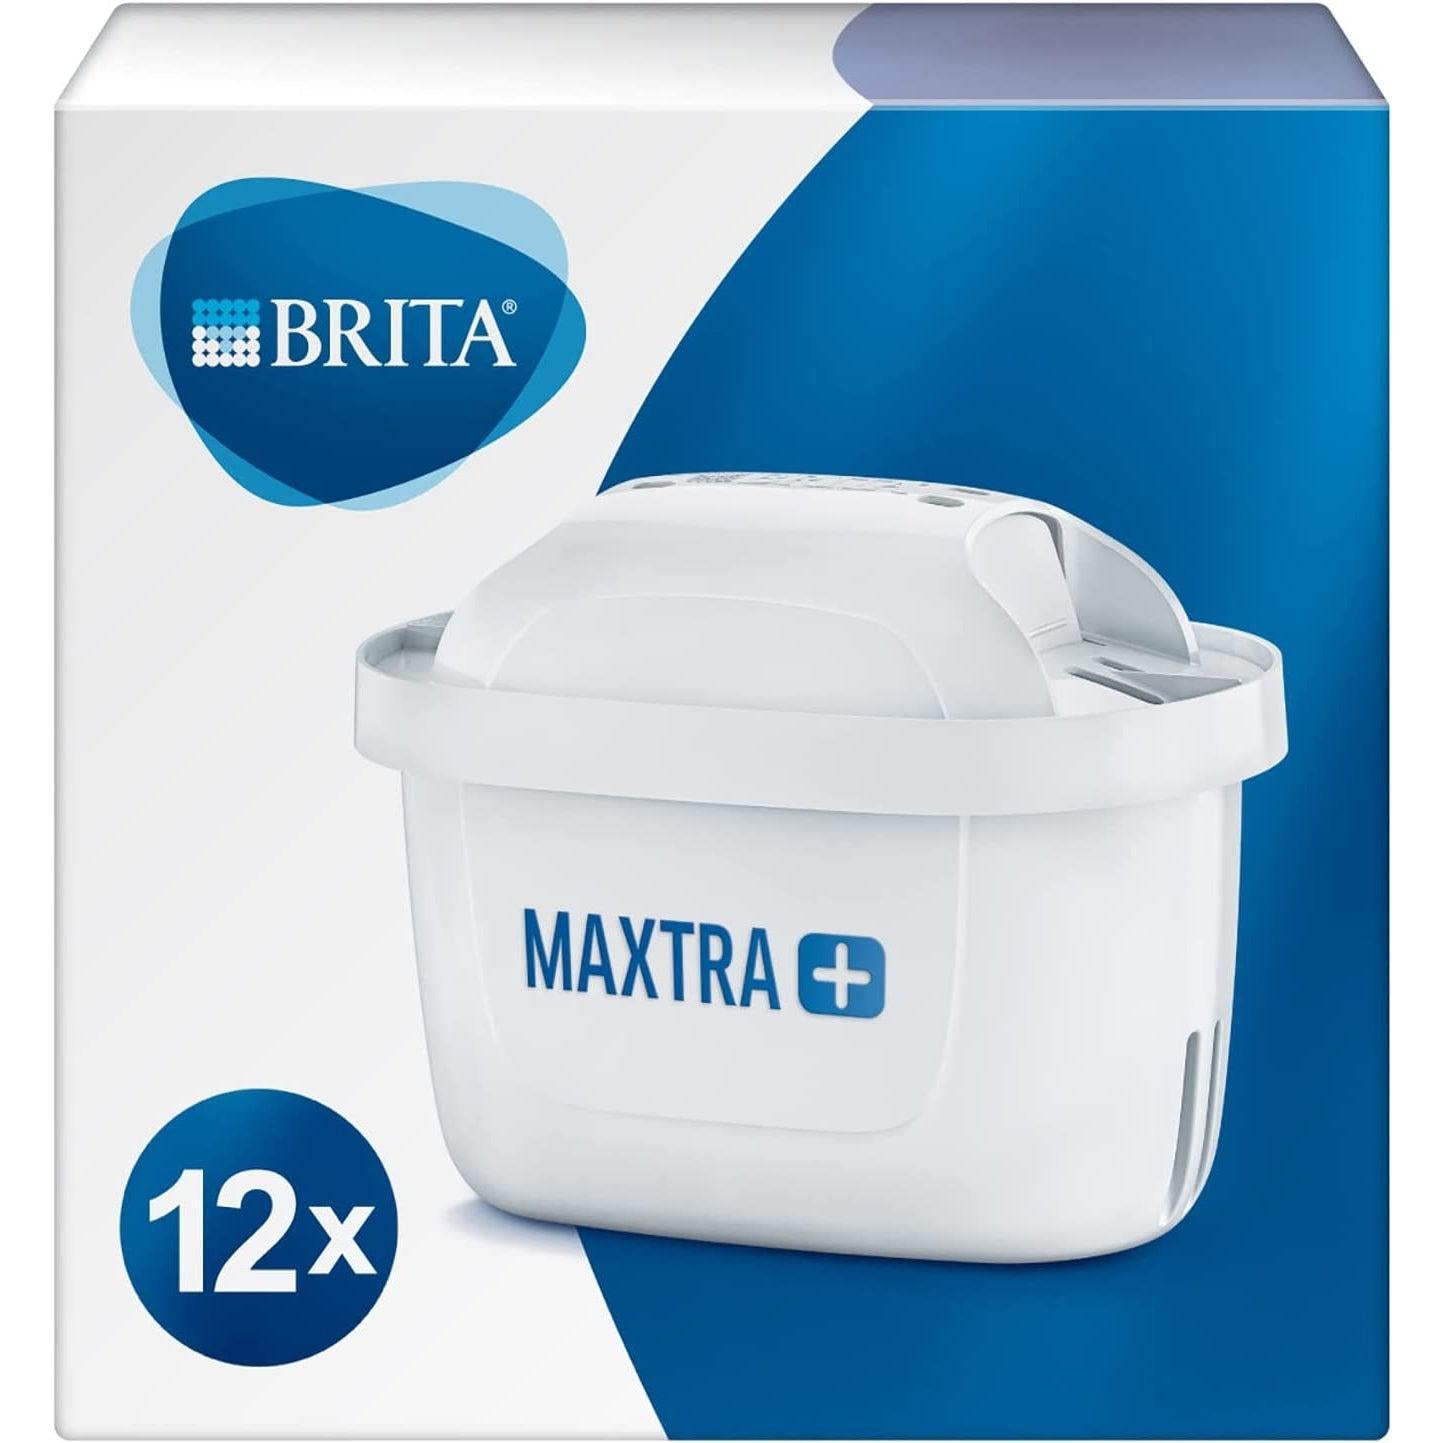 BRITA Maxtra+ Water Filter Cartridges - MicroFlow Technology Filtration, 12 Pack - Healthxpress.ie